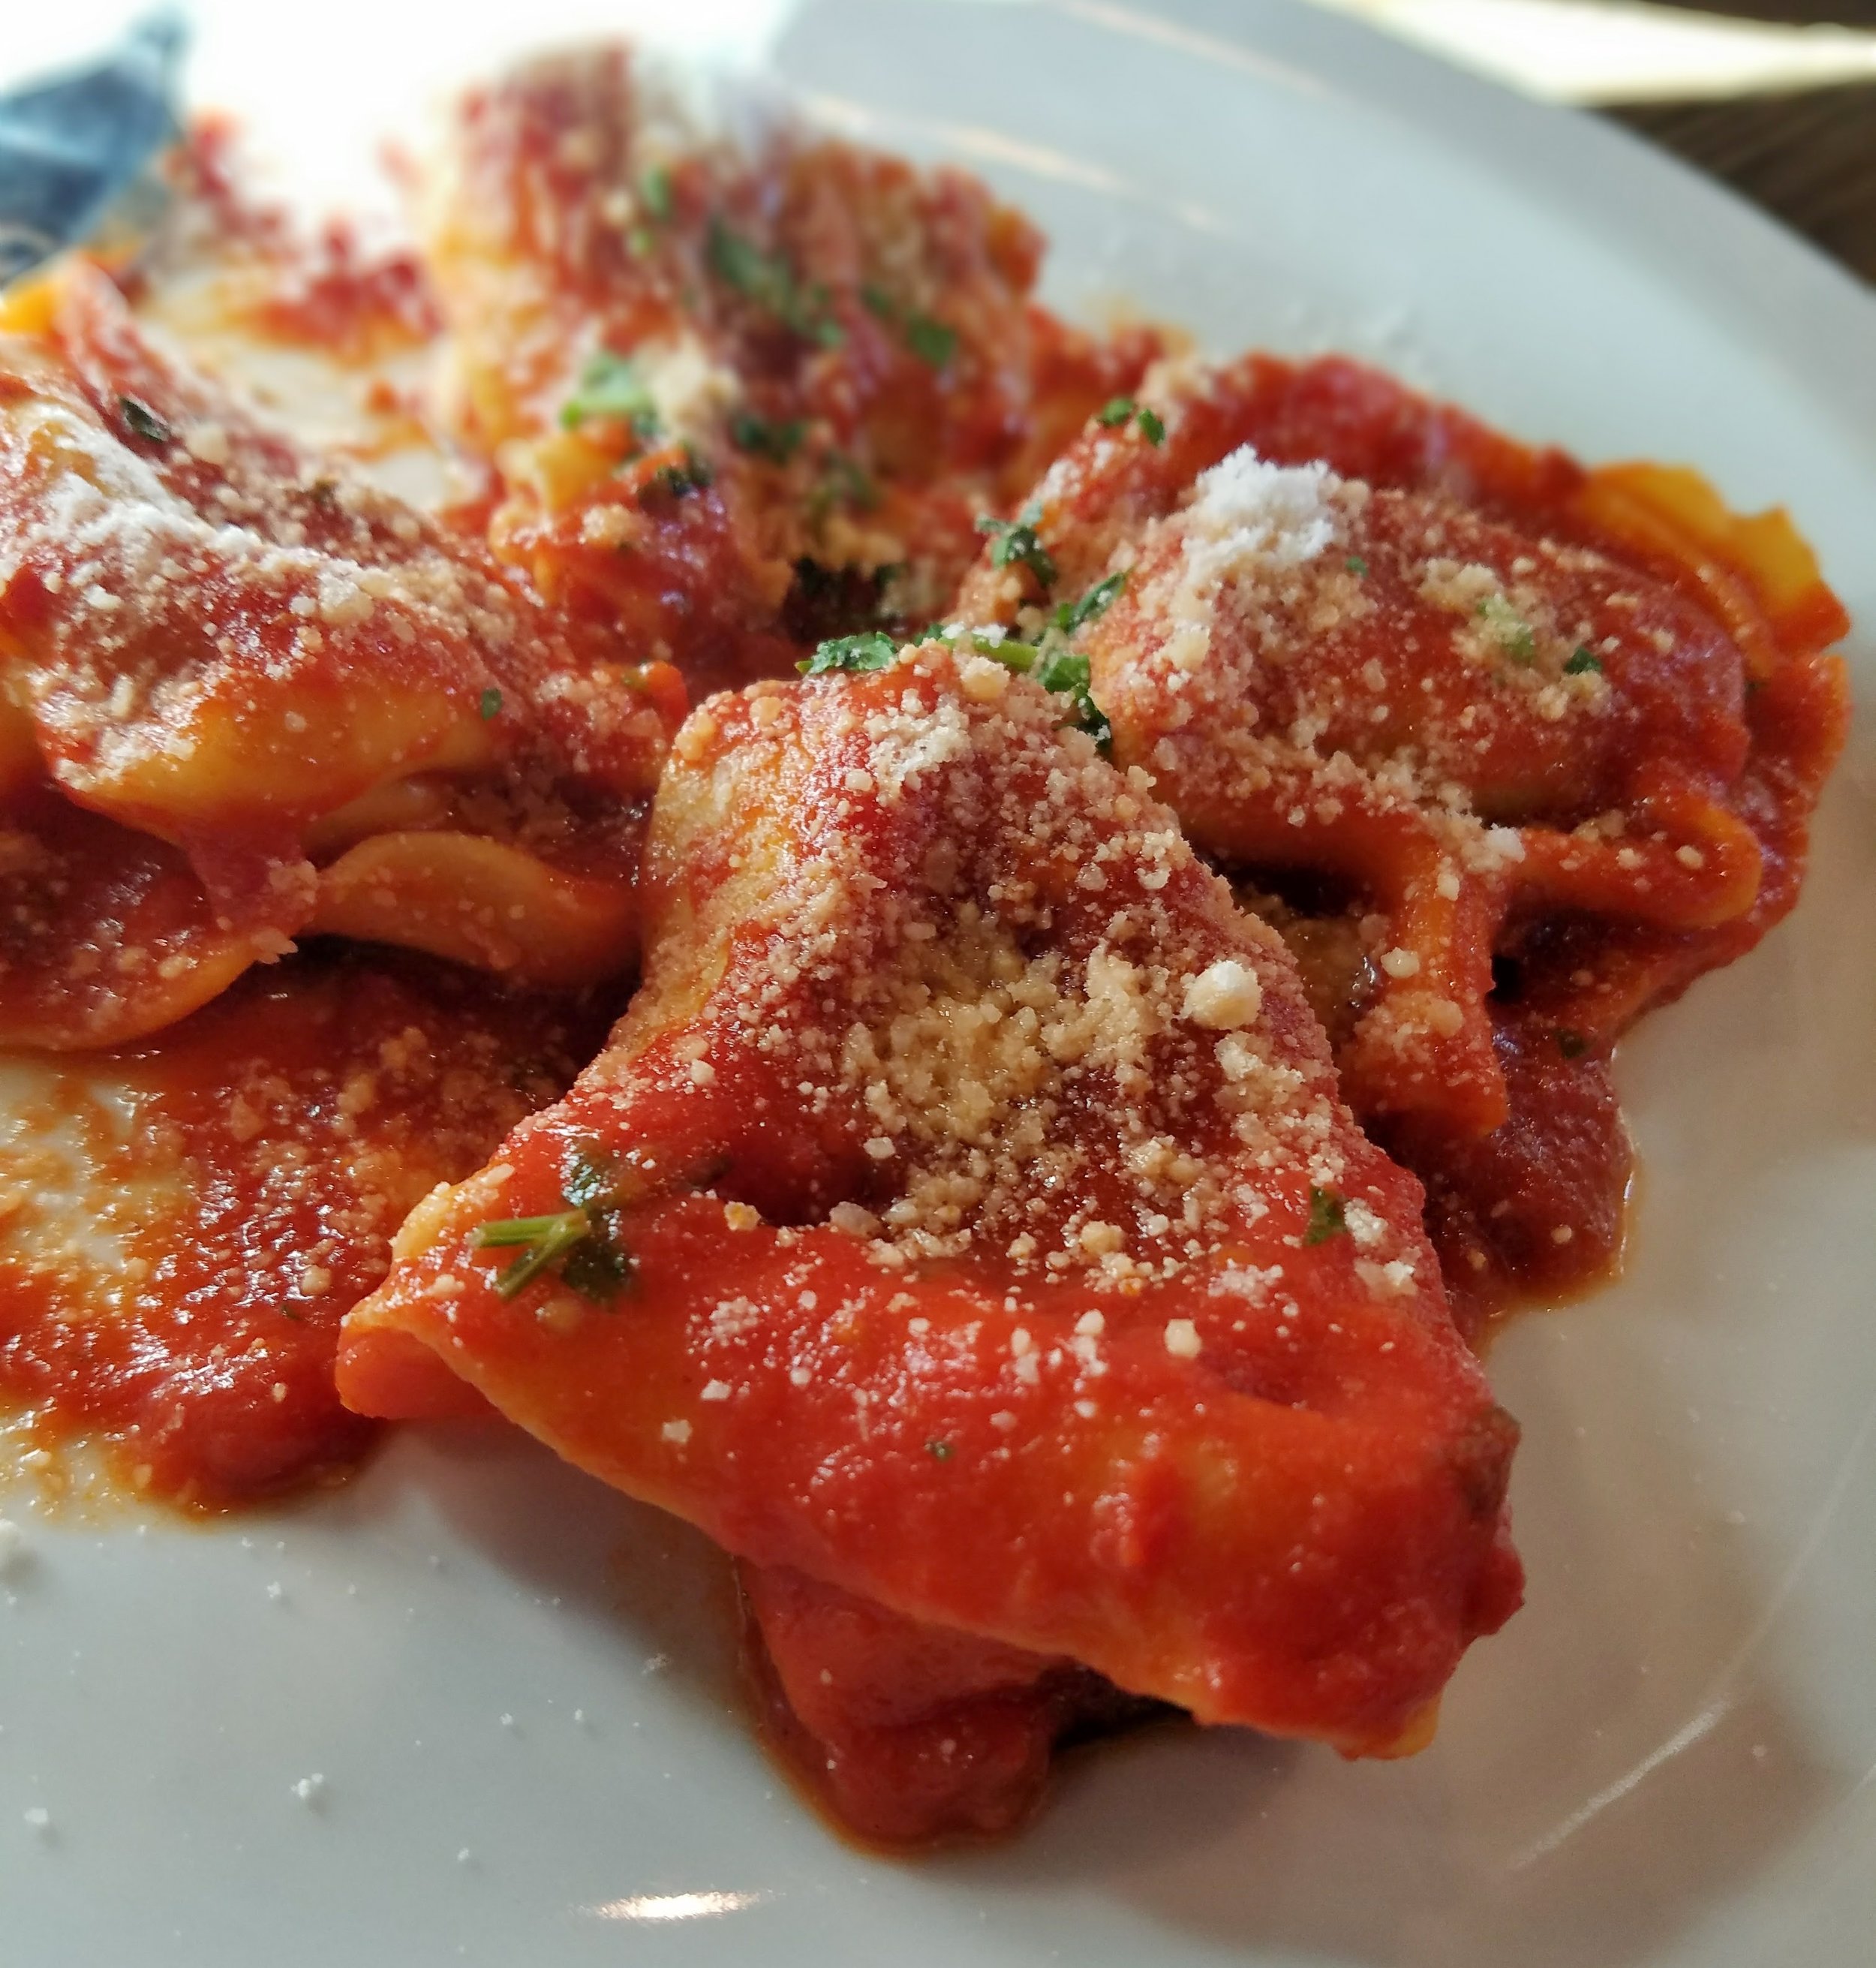 Veal and beef ravioli with marinara (a special)